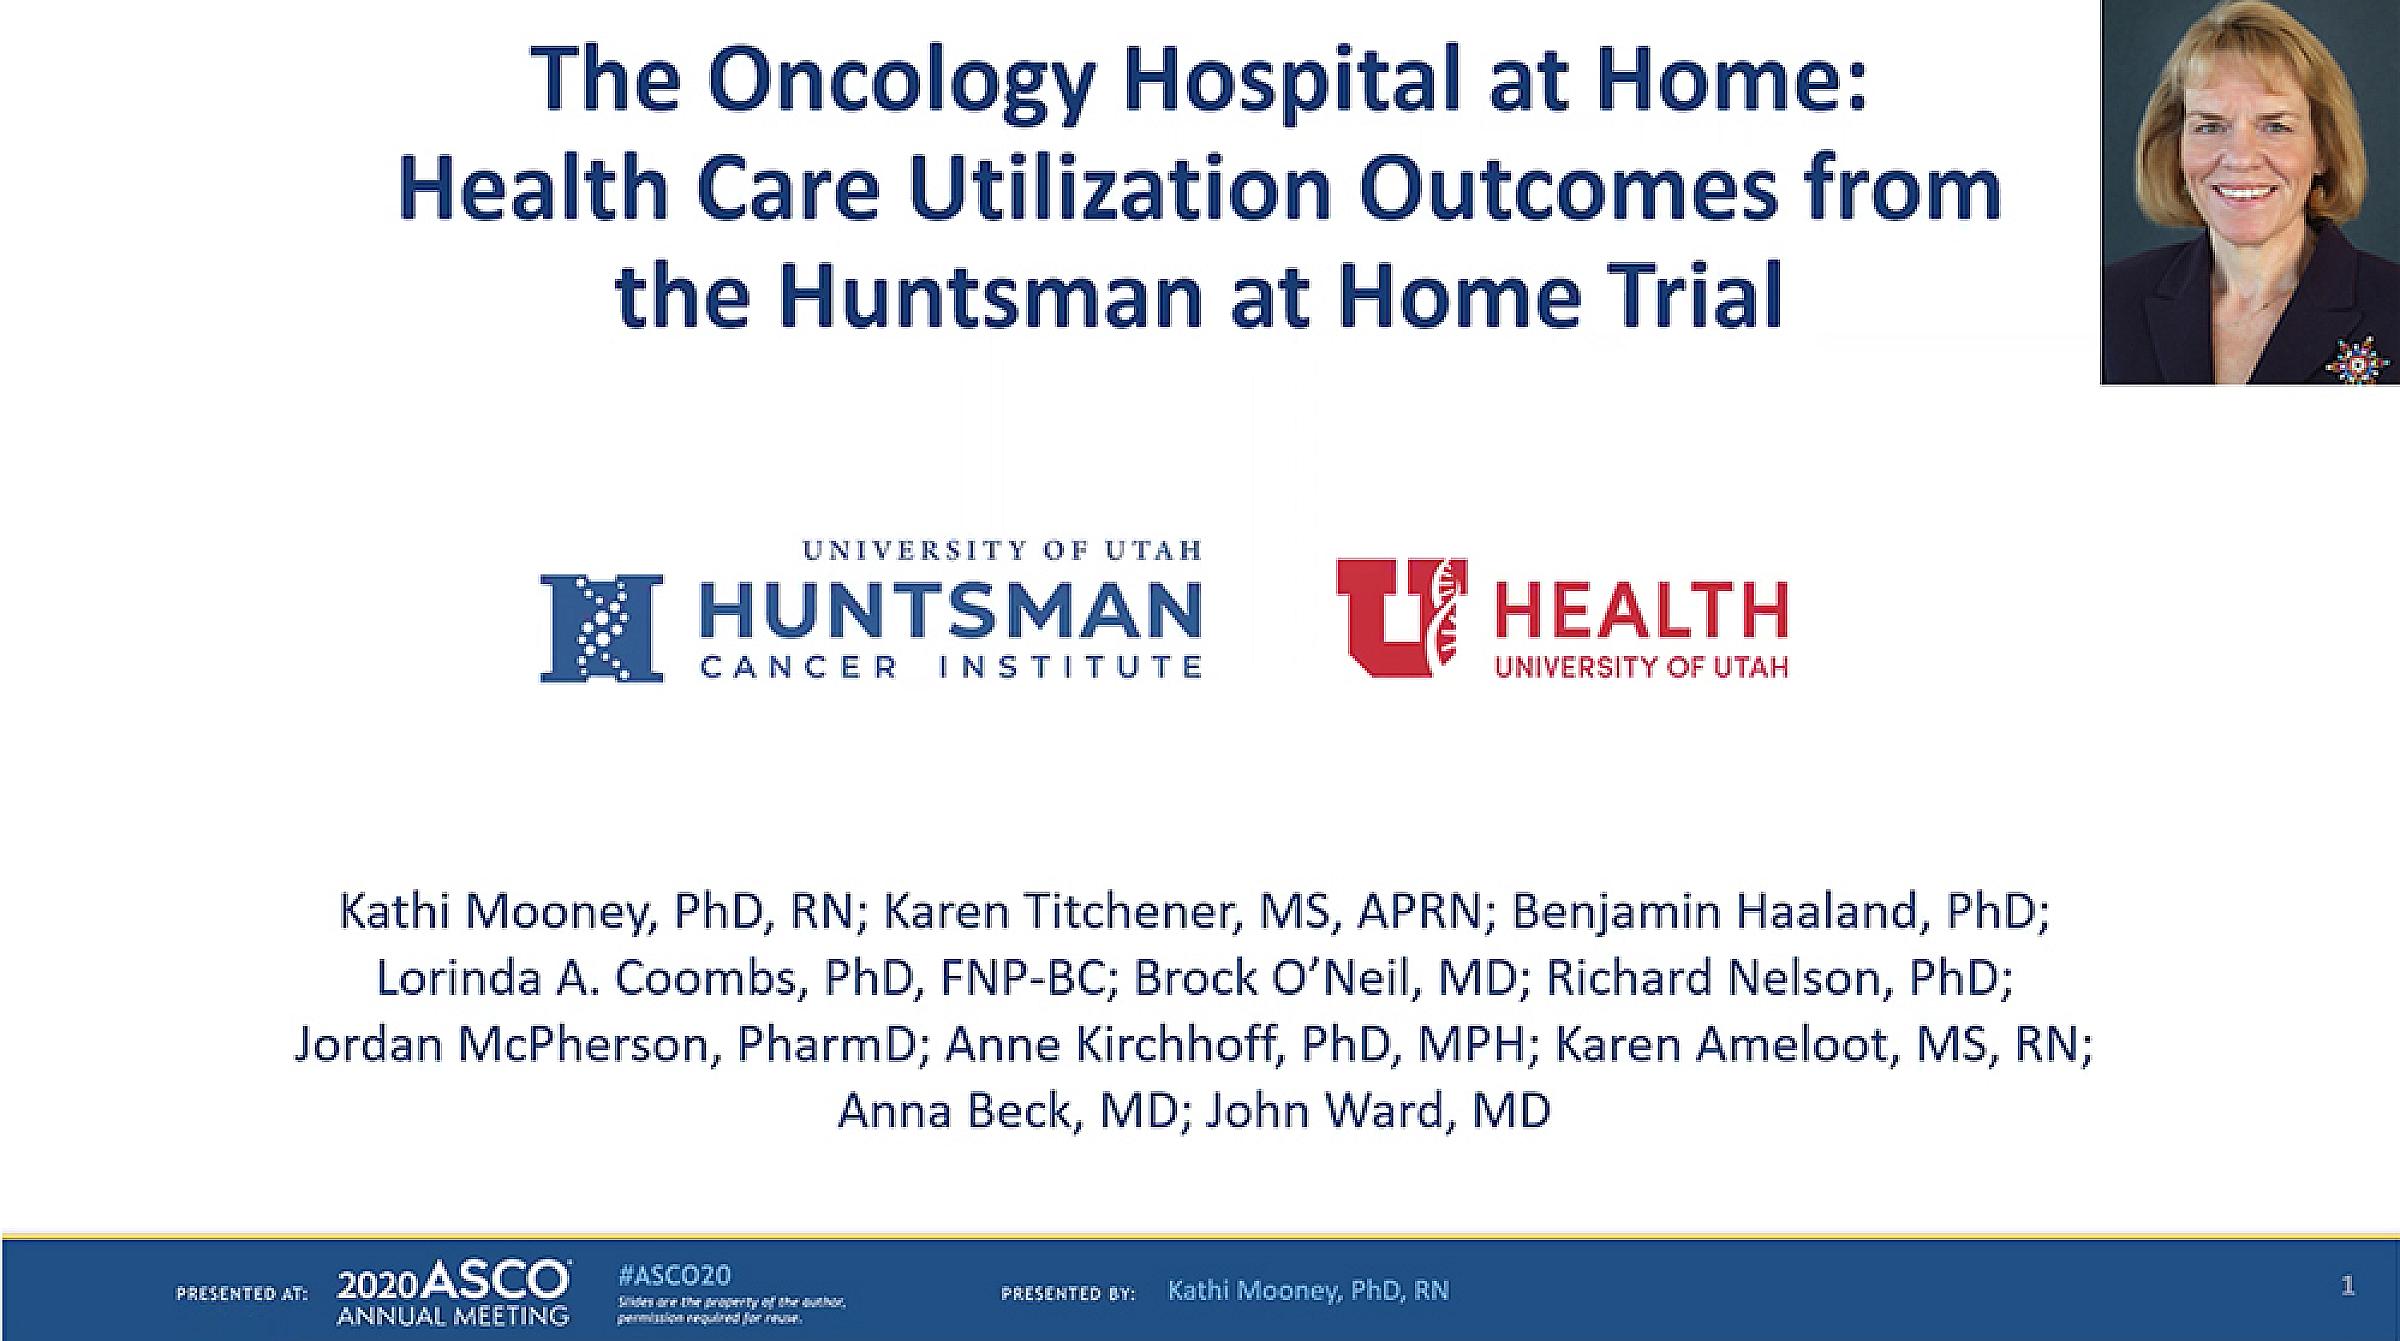 Presentation flyer that reads "The Oncology Hospital at Home: Health Care Utilization Outcomes from the Huntsman at Home Trial"